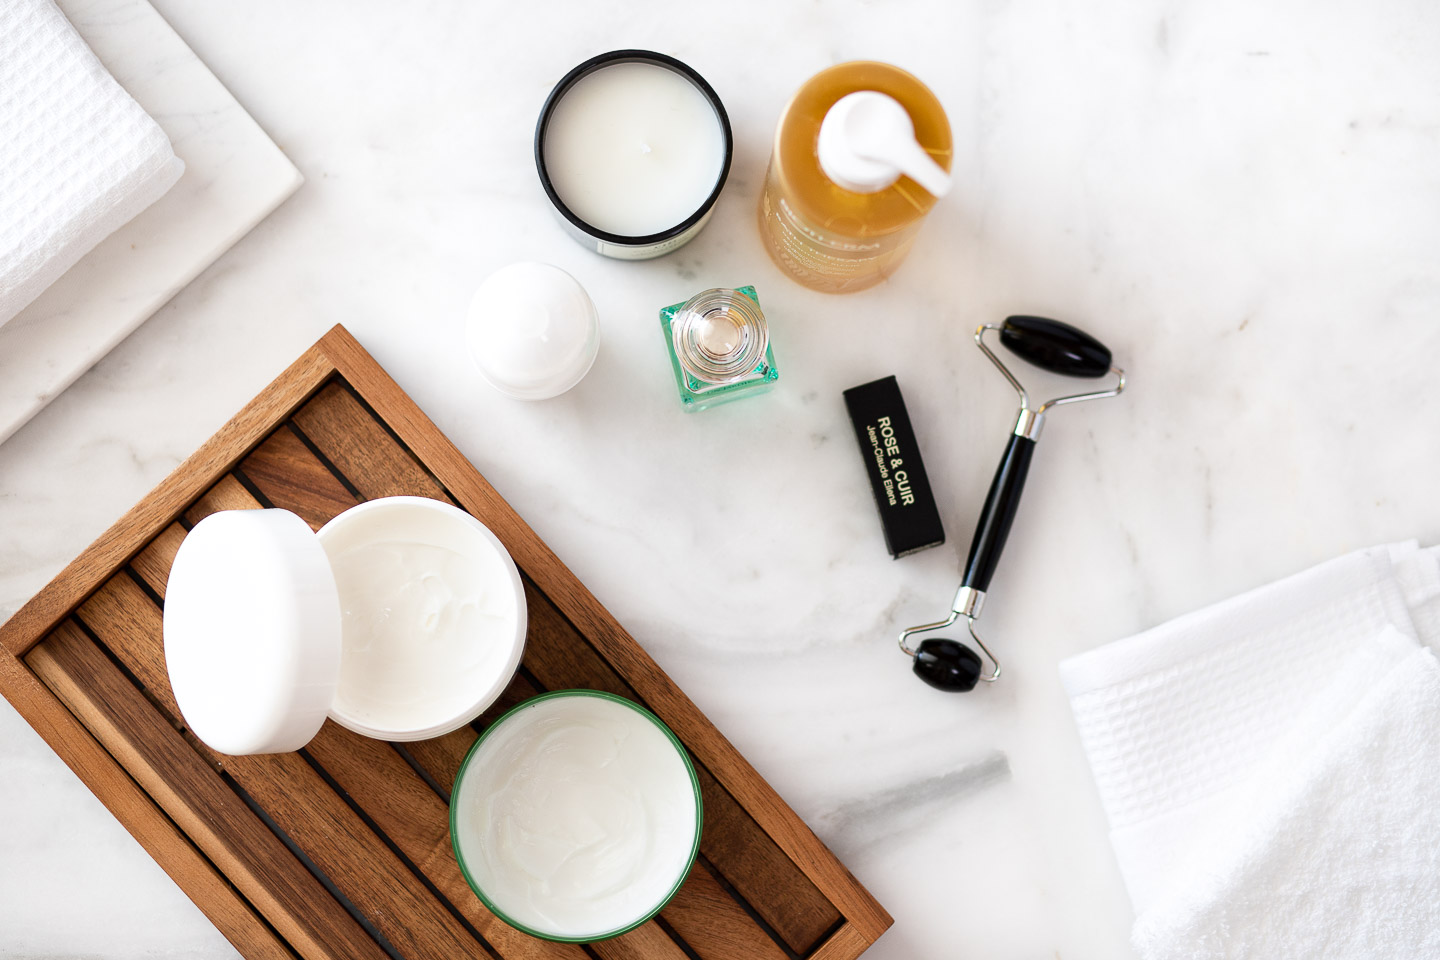 BODY BEAUTY PRODUCTS I’VE BEEN RECENTLY LOVING